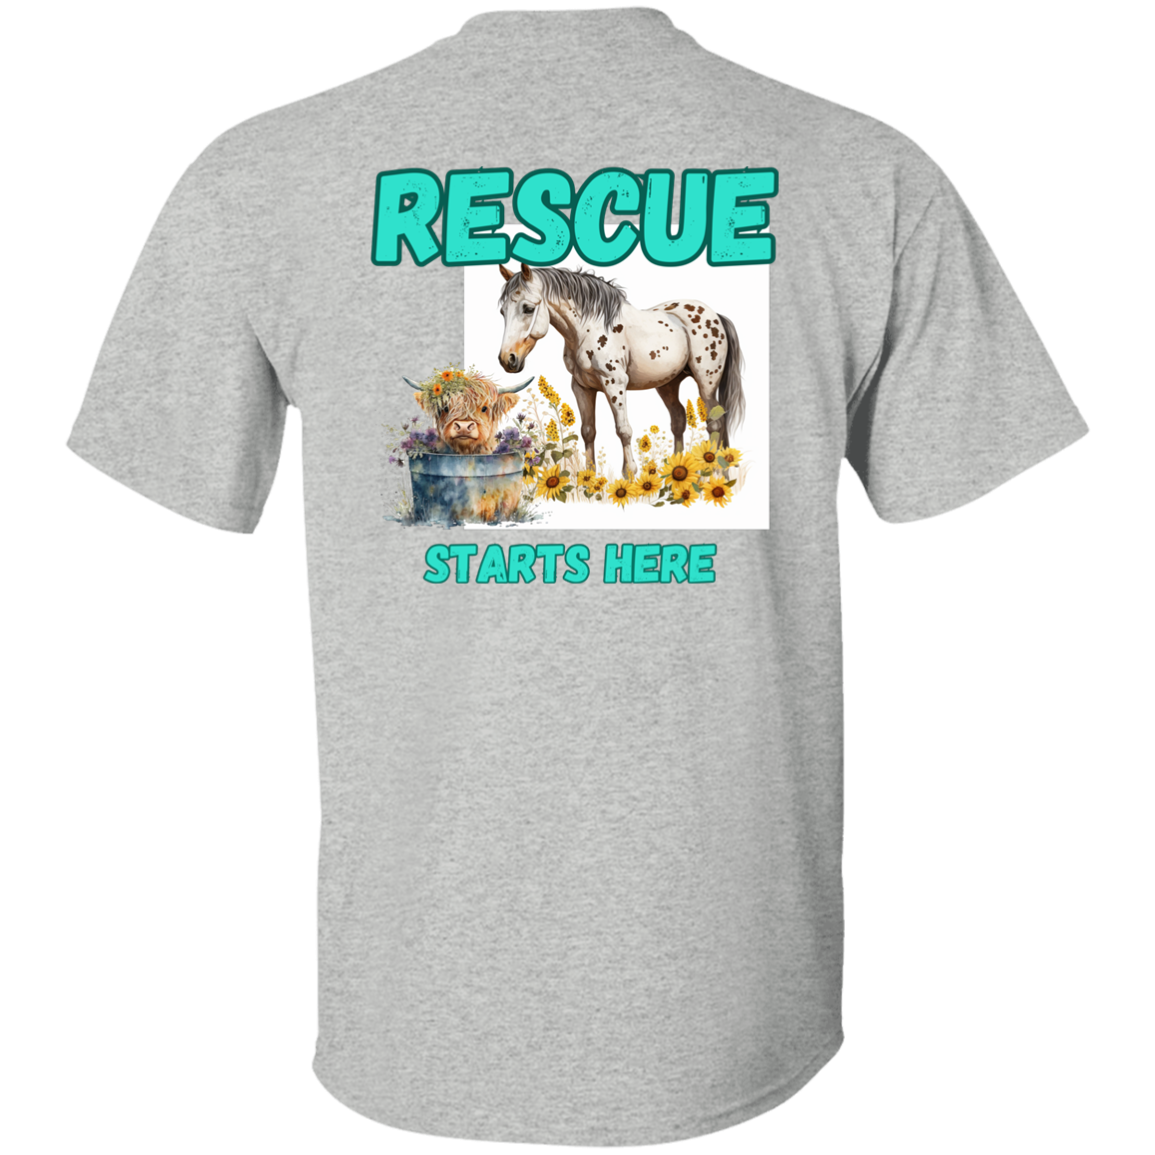 Rescue Starts Here T-Shirt For Donation of 10%